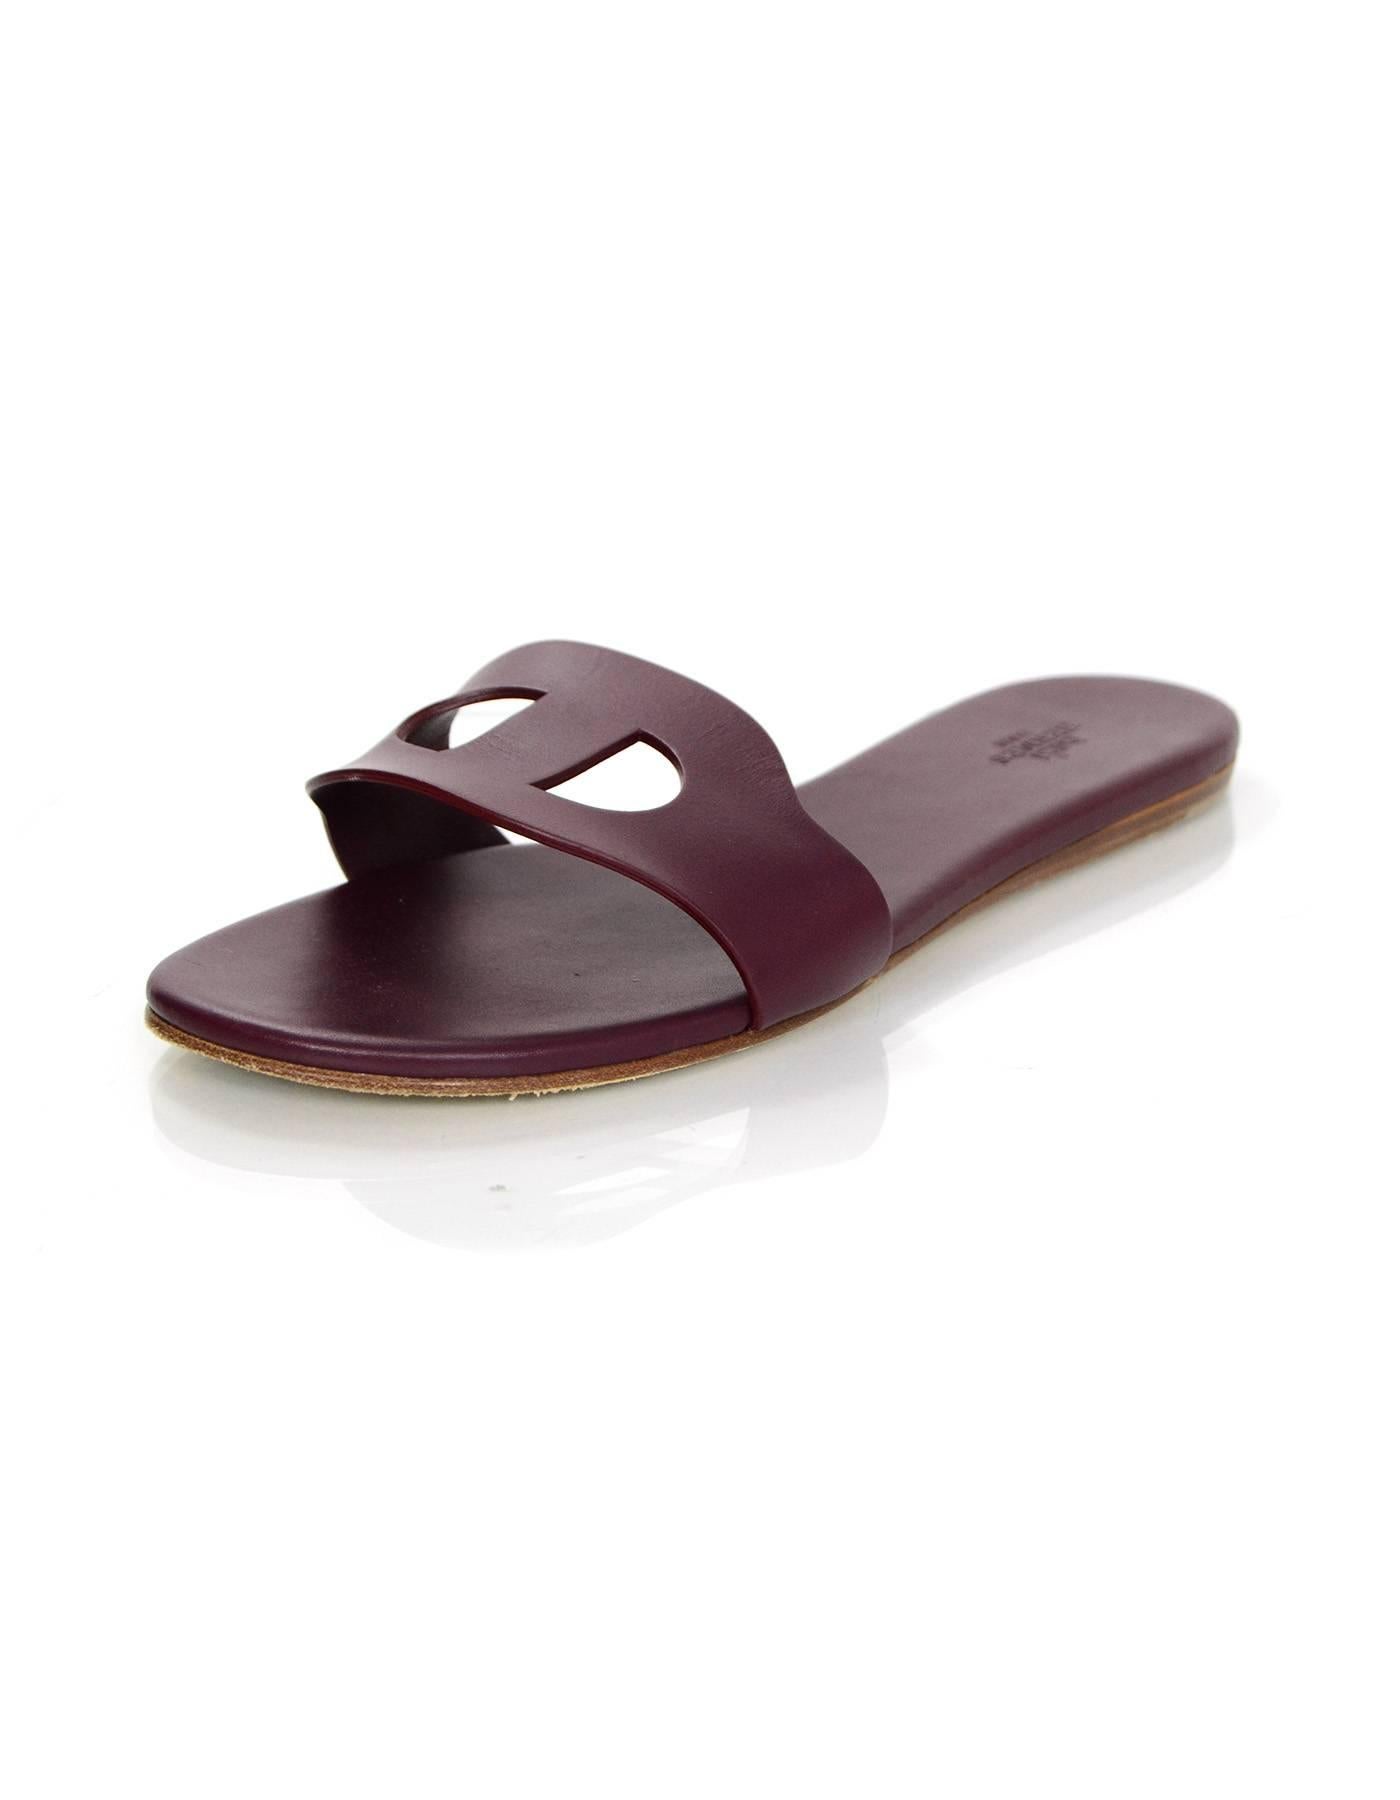 Hermes Bordeaux Lisboa Chain D'ancre Sandals Sz 38.5

Made In: Spain
Color: Burgundy
Materials: Leather
Closure/Opening: Slide on
Sole Stamp: Hermes 38.5 Semelle Cuir Made in Spain
Retail Price: $620 + tax
Overall Condition: Excellent pre-owned